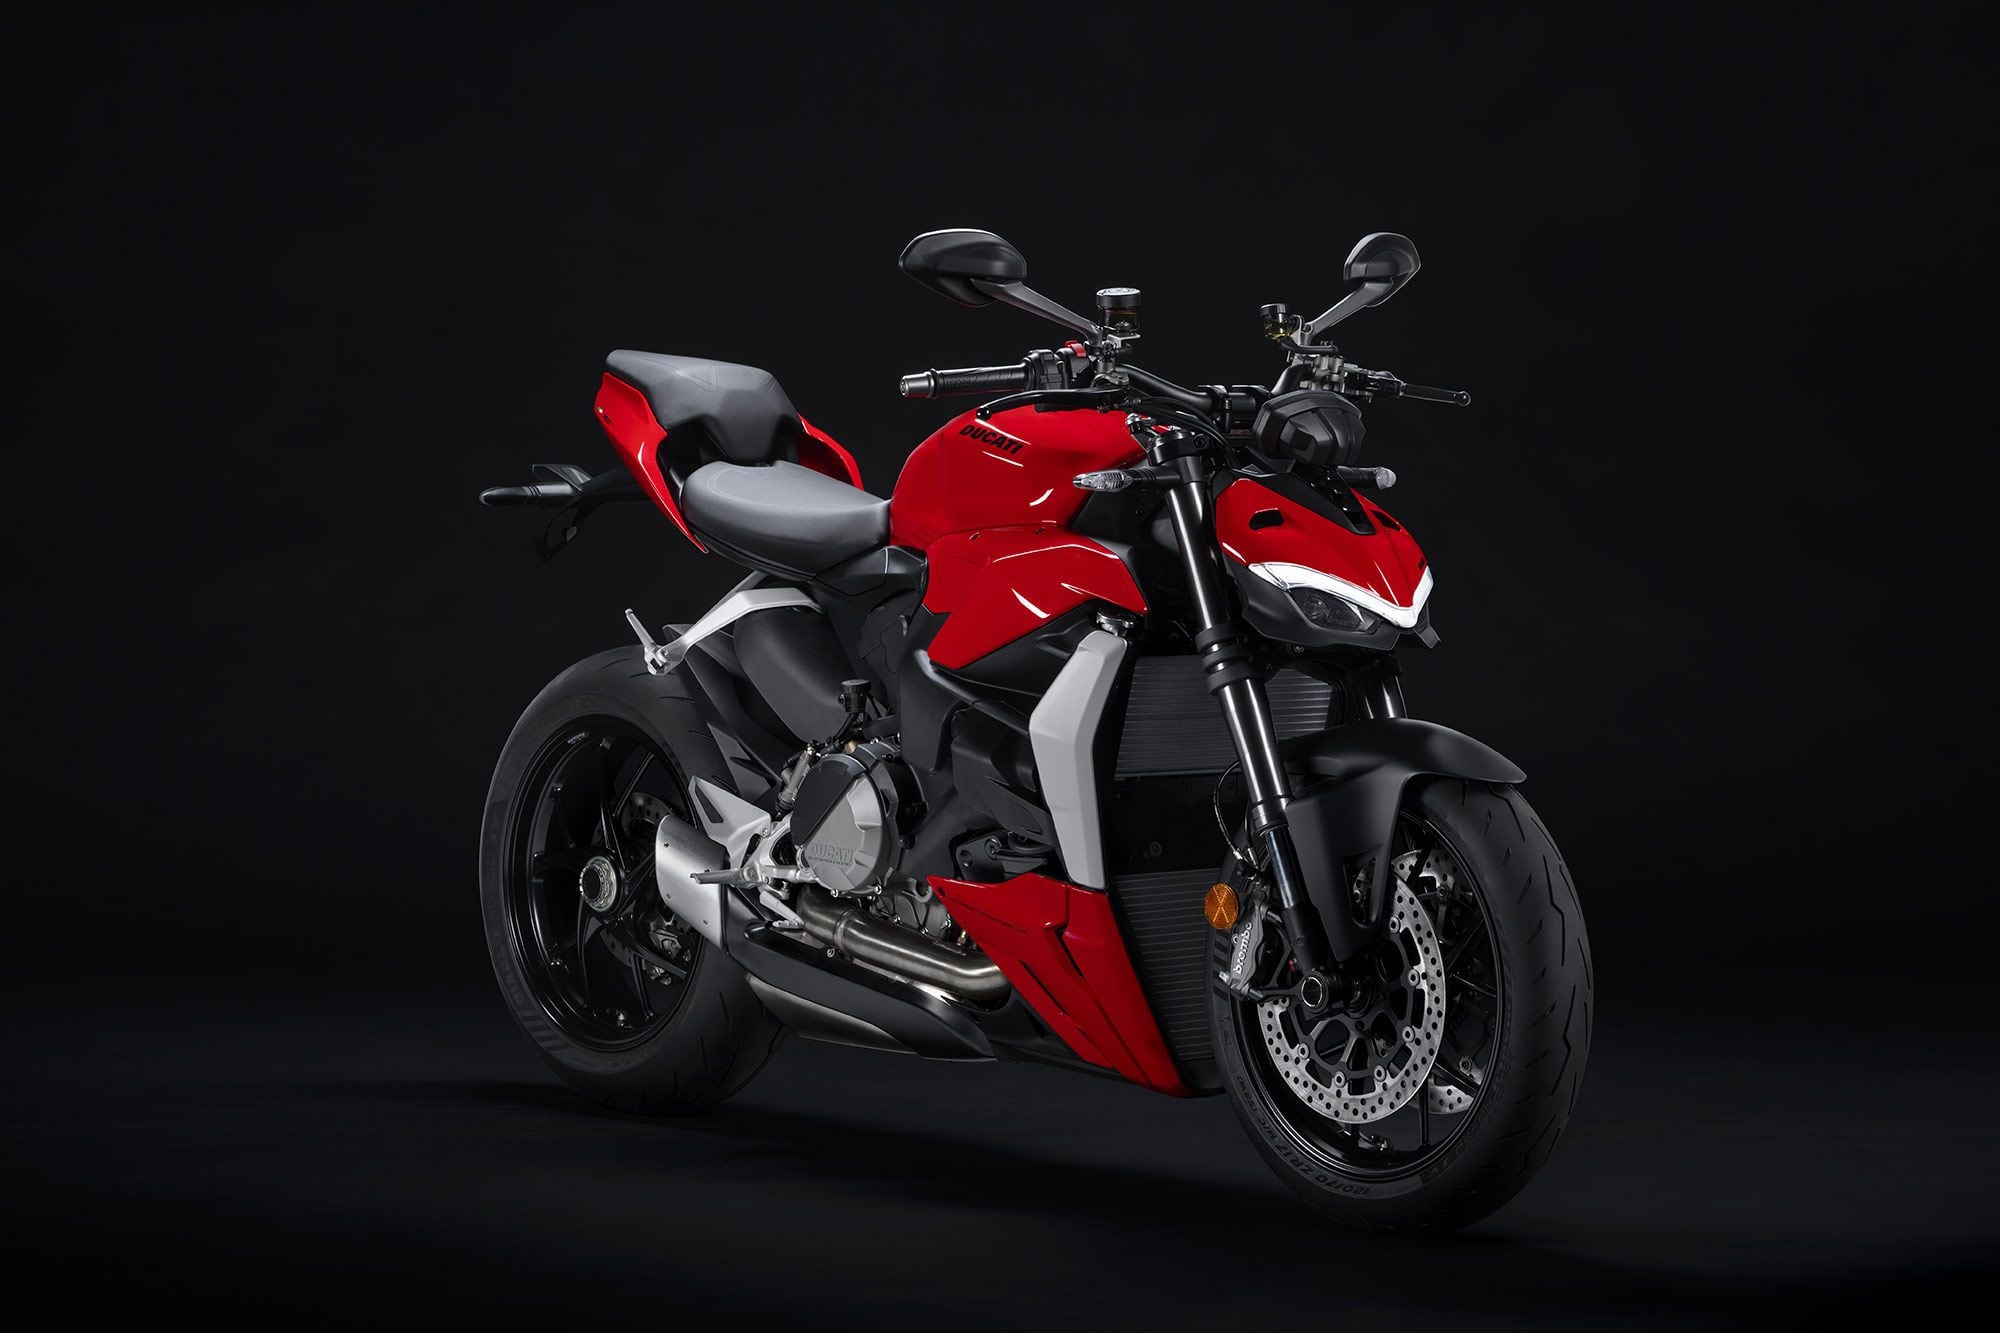 The new Streetfighter V2’s engine is a great choice. Even though it’s smaller than the original Streetfighter’s 1,098cc powerplant, it makes the same horsepower and meets current emissions standards.